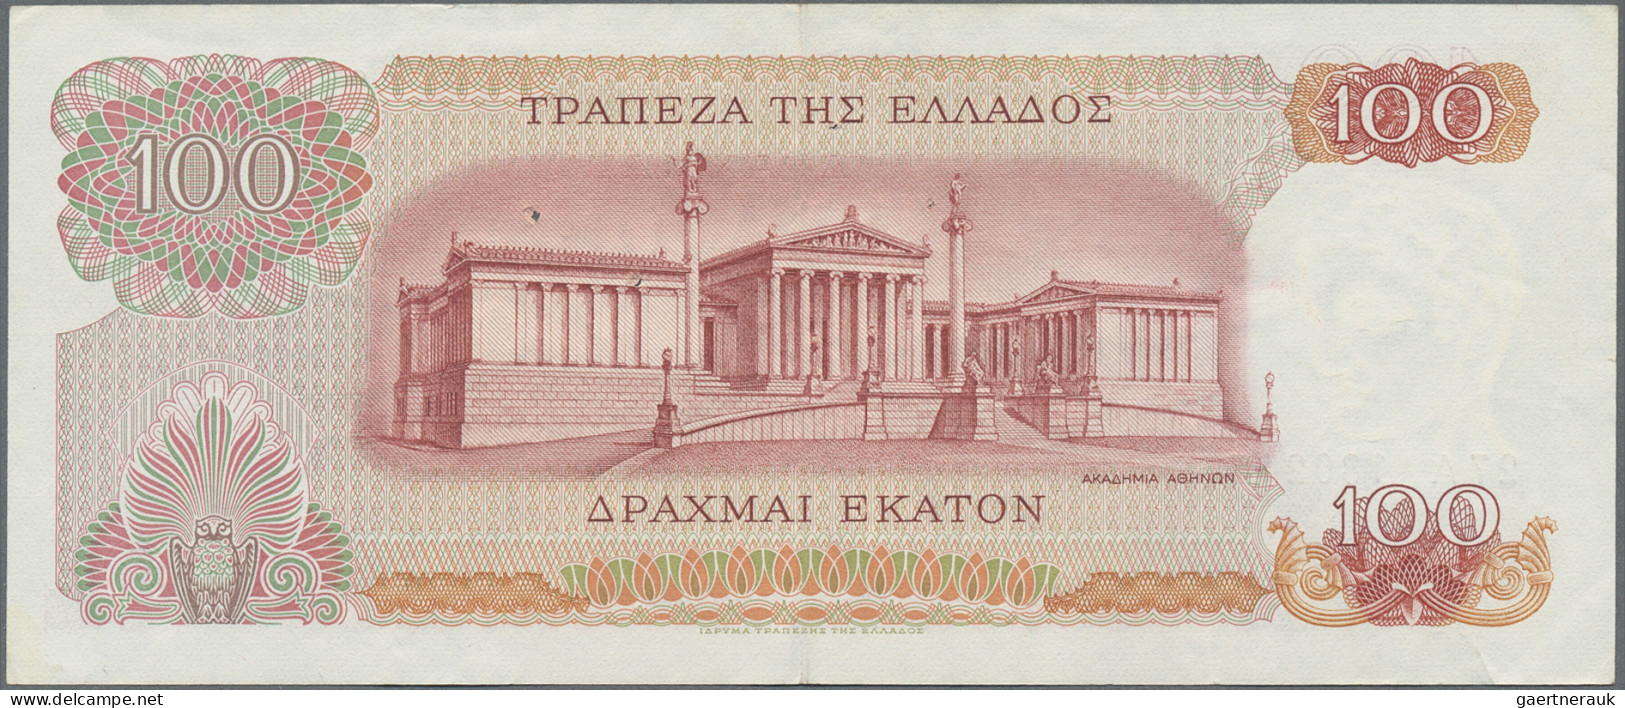 Greece: Bank of Greece, lot with 6 banknotes, comprising 20.000 Drachmai 1949 (P